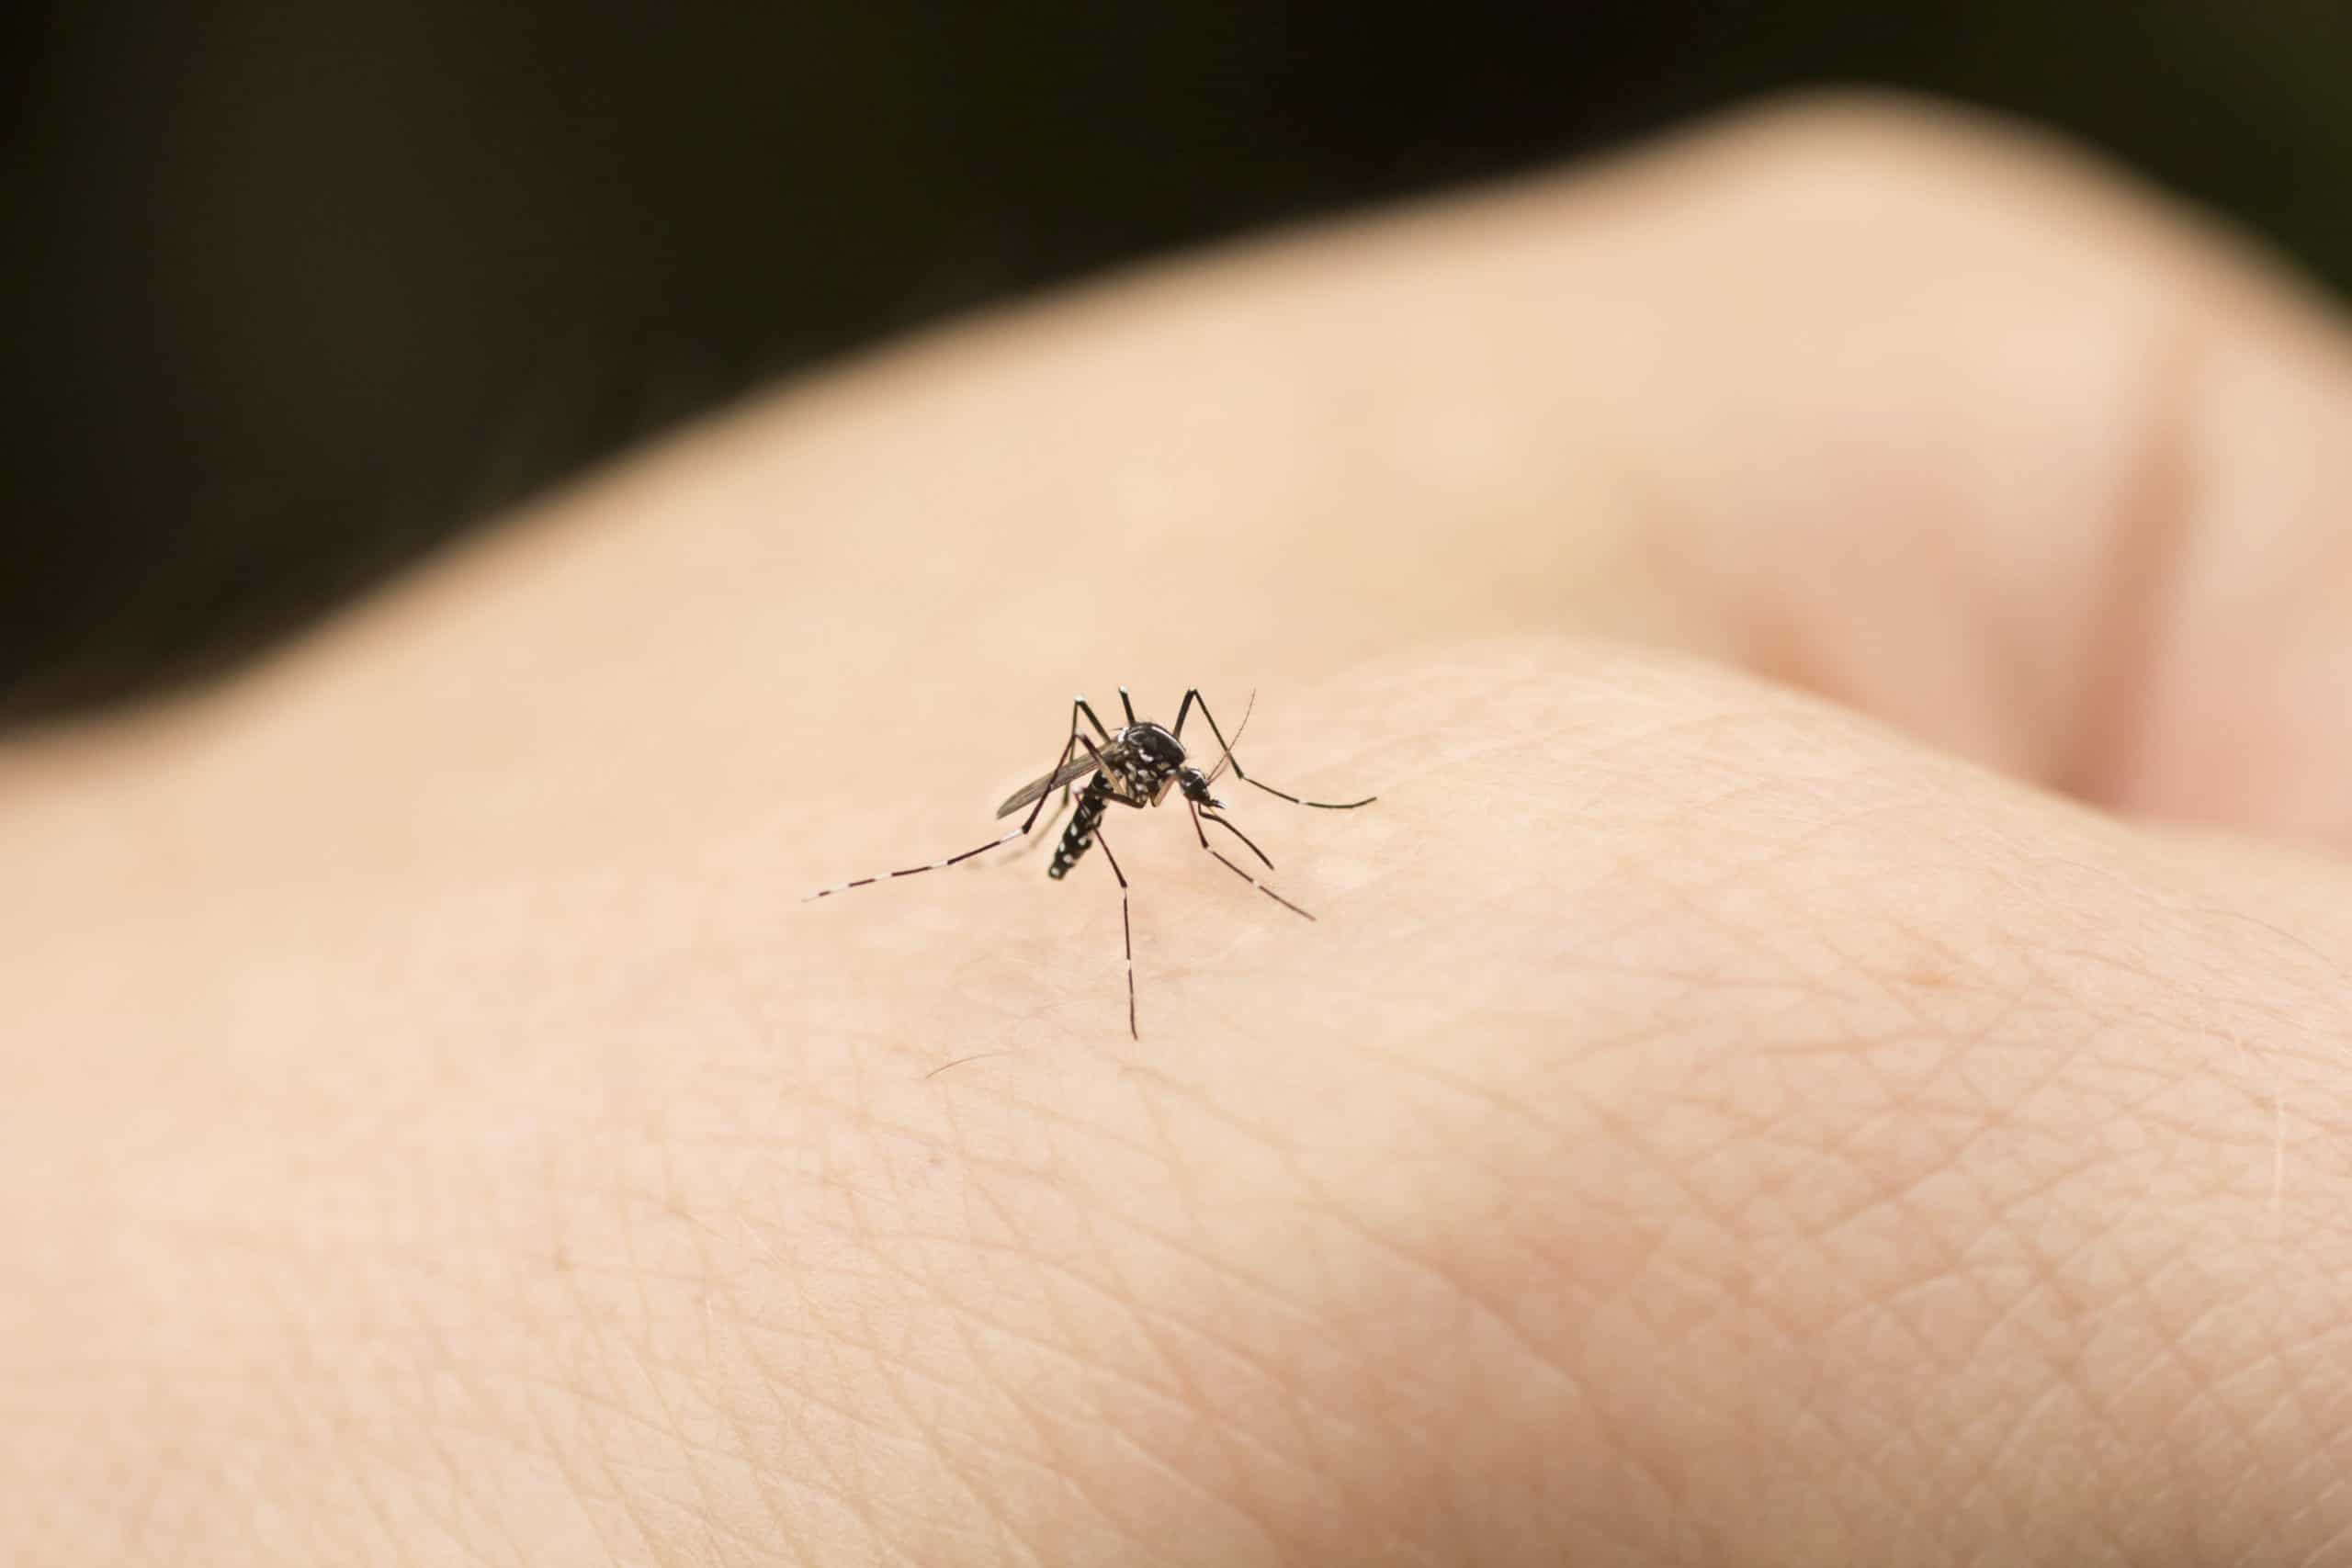 Picture of a mosquito on a hand